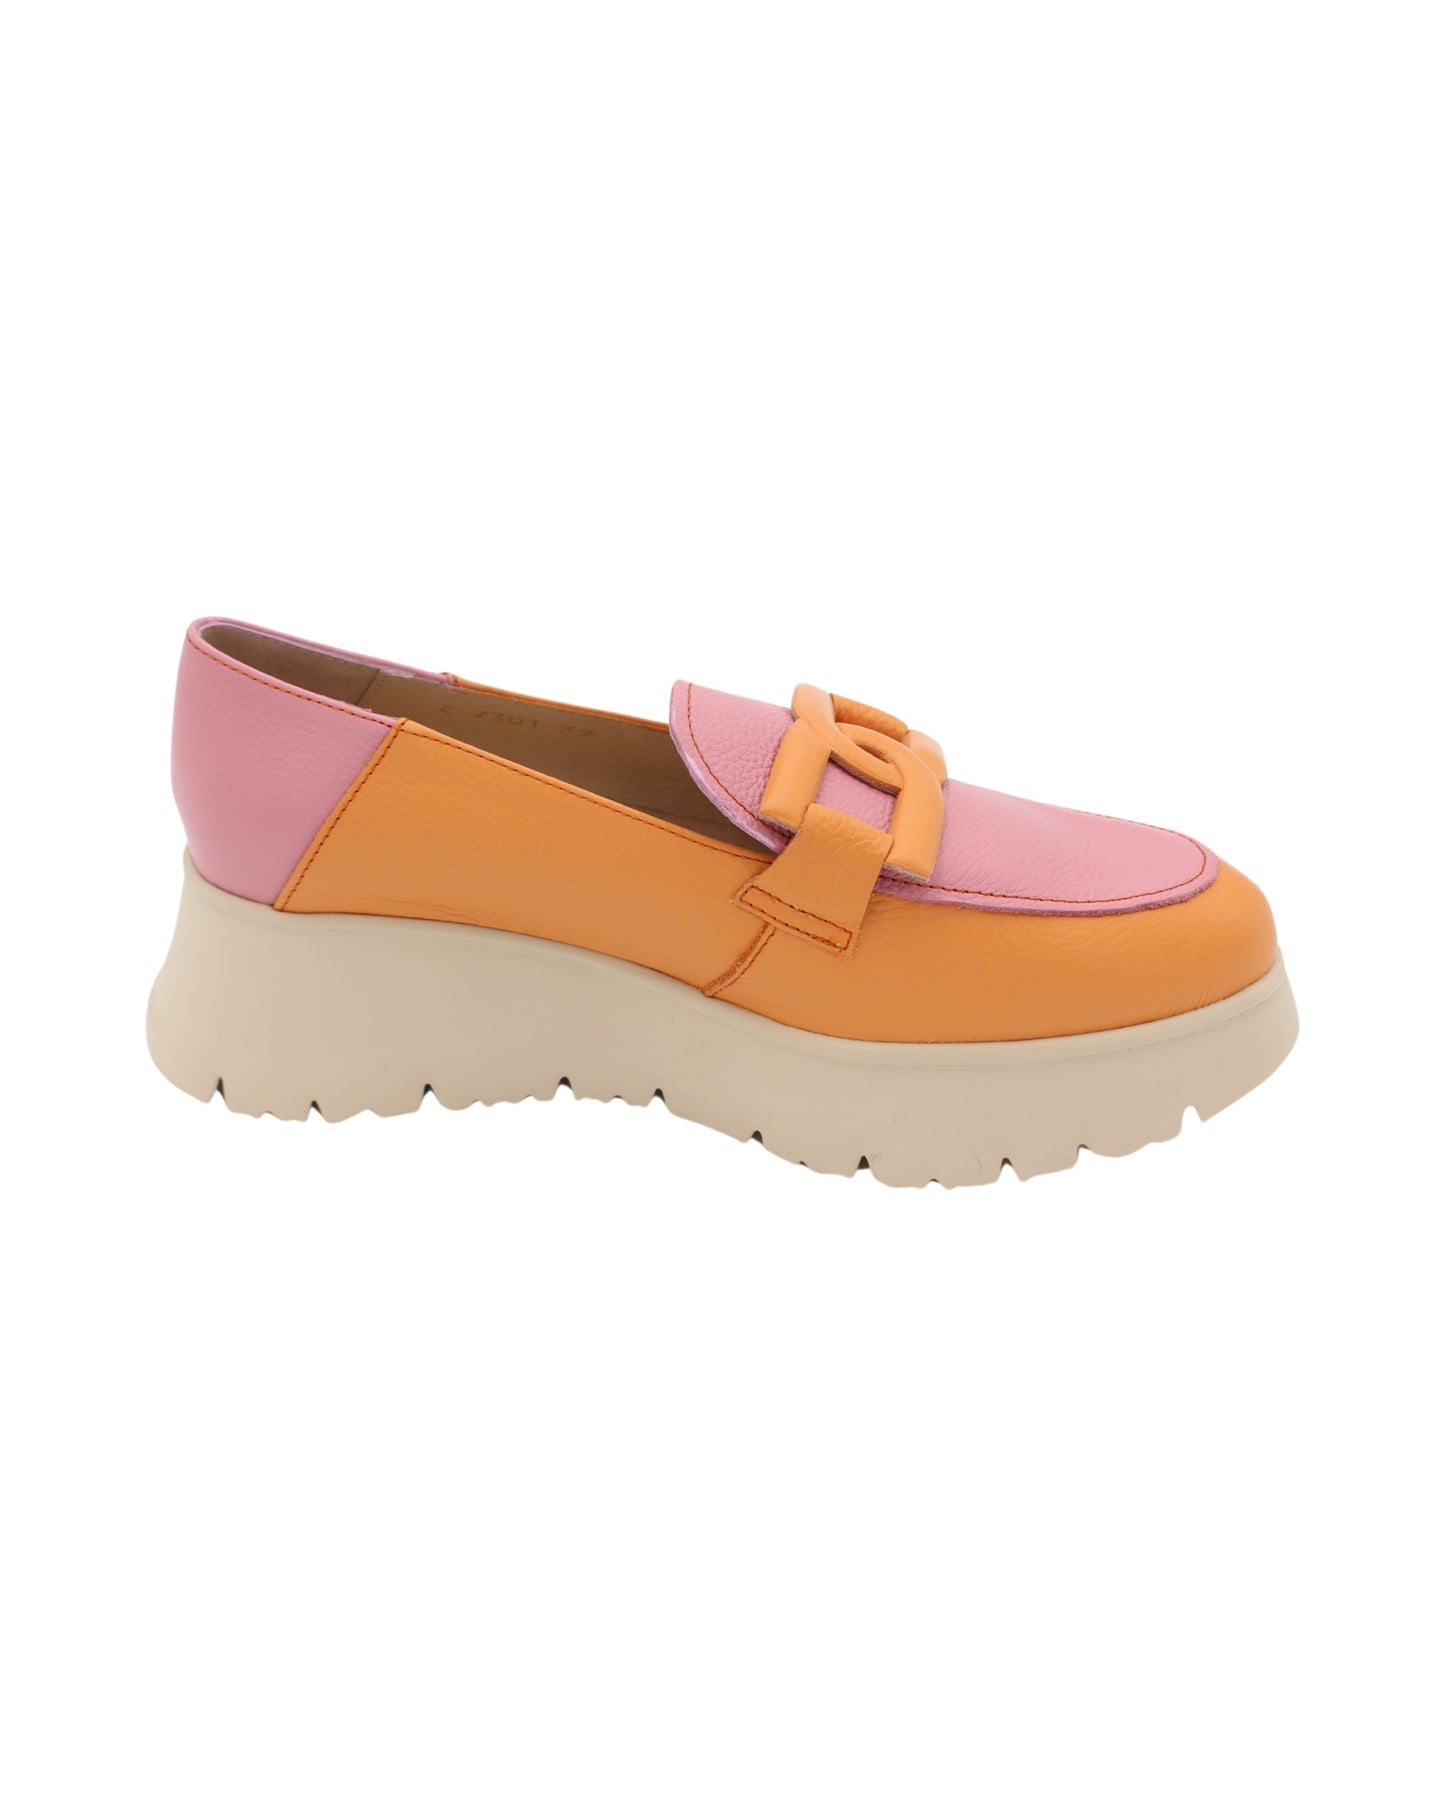 Wonders - Ladies Shoes Loafers Apricot, Blush (1904)